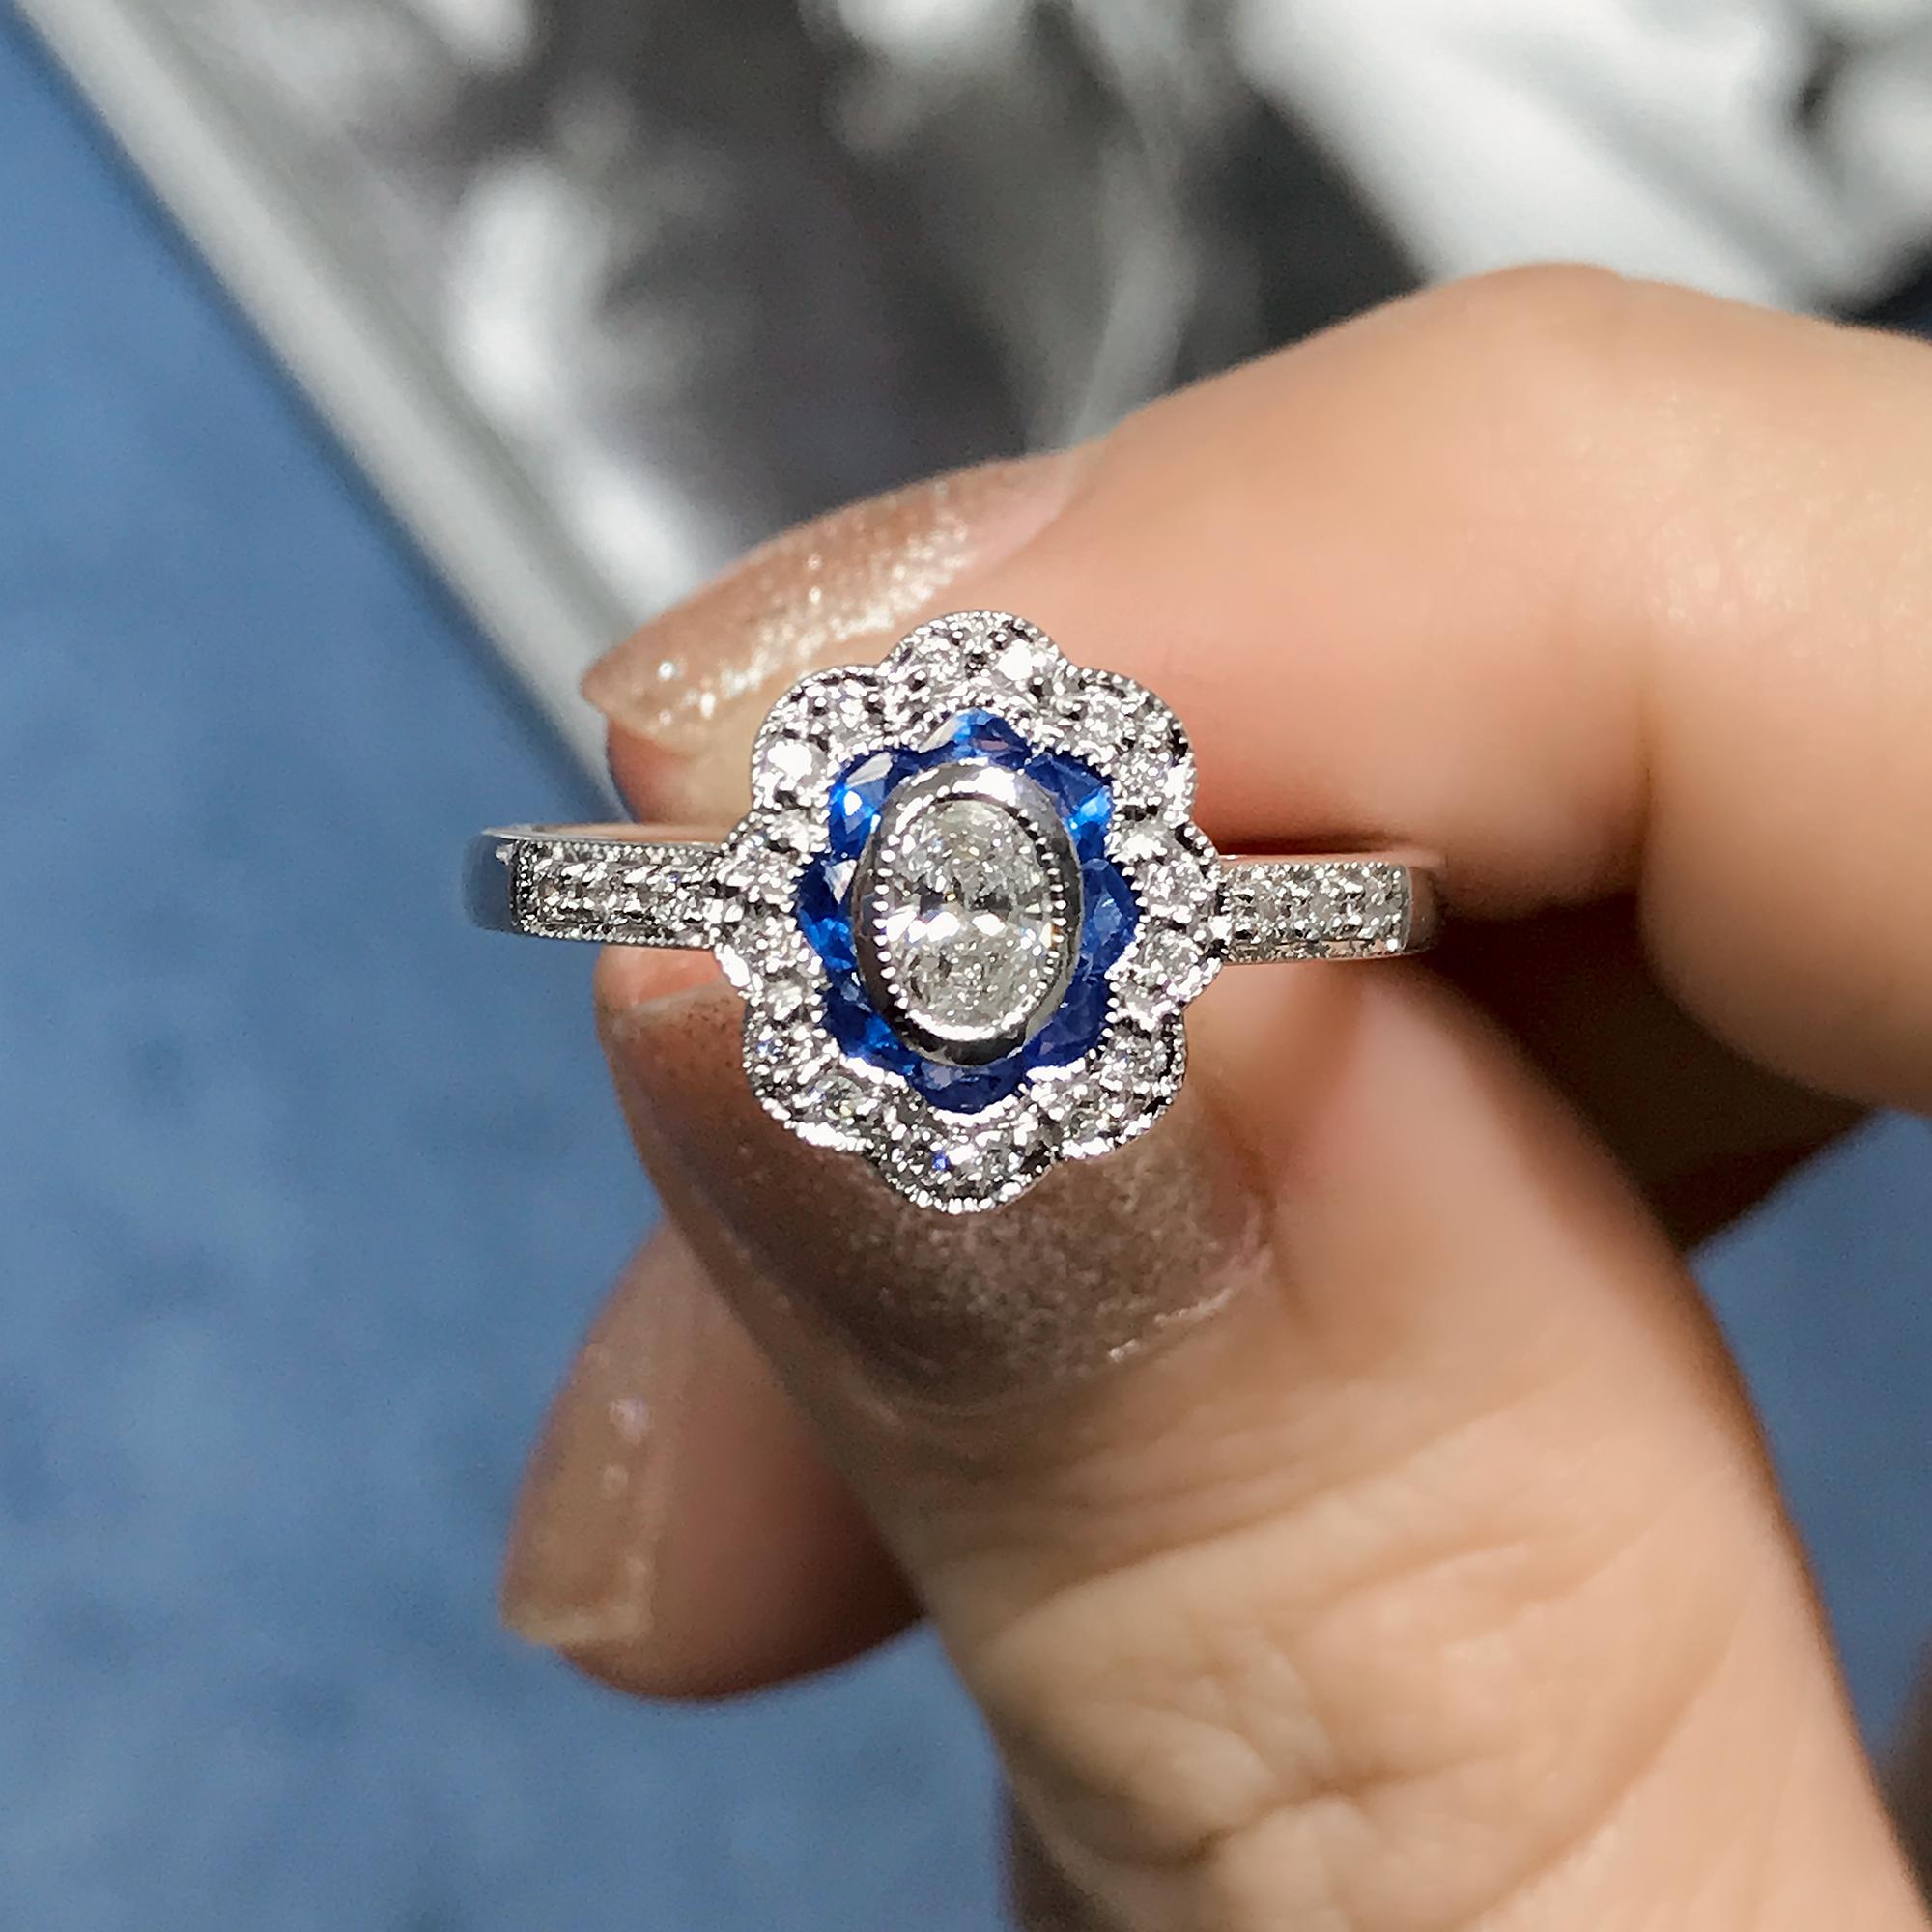 This beautiful ring is a vintage inspired style, the popular halo ring features oval G color VS clarity diamond for its center, surrounded by French cut blue sapphire and round diamonds. This would make a wonderful engagement ring, or to commemorate